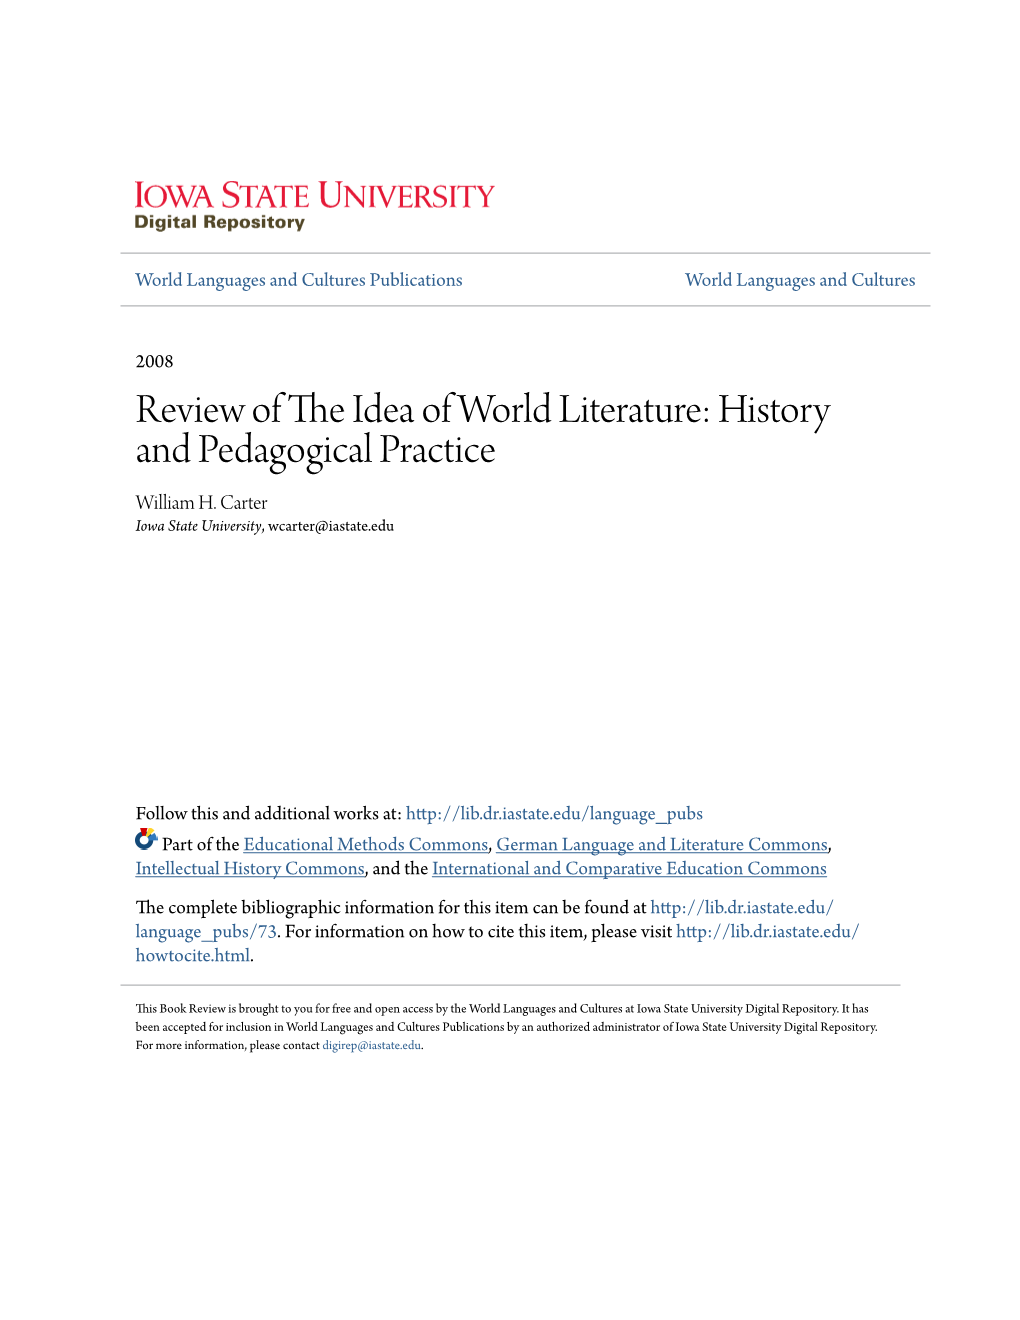 Review of the Idea of World Literature: History and Pedagogical Practice